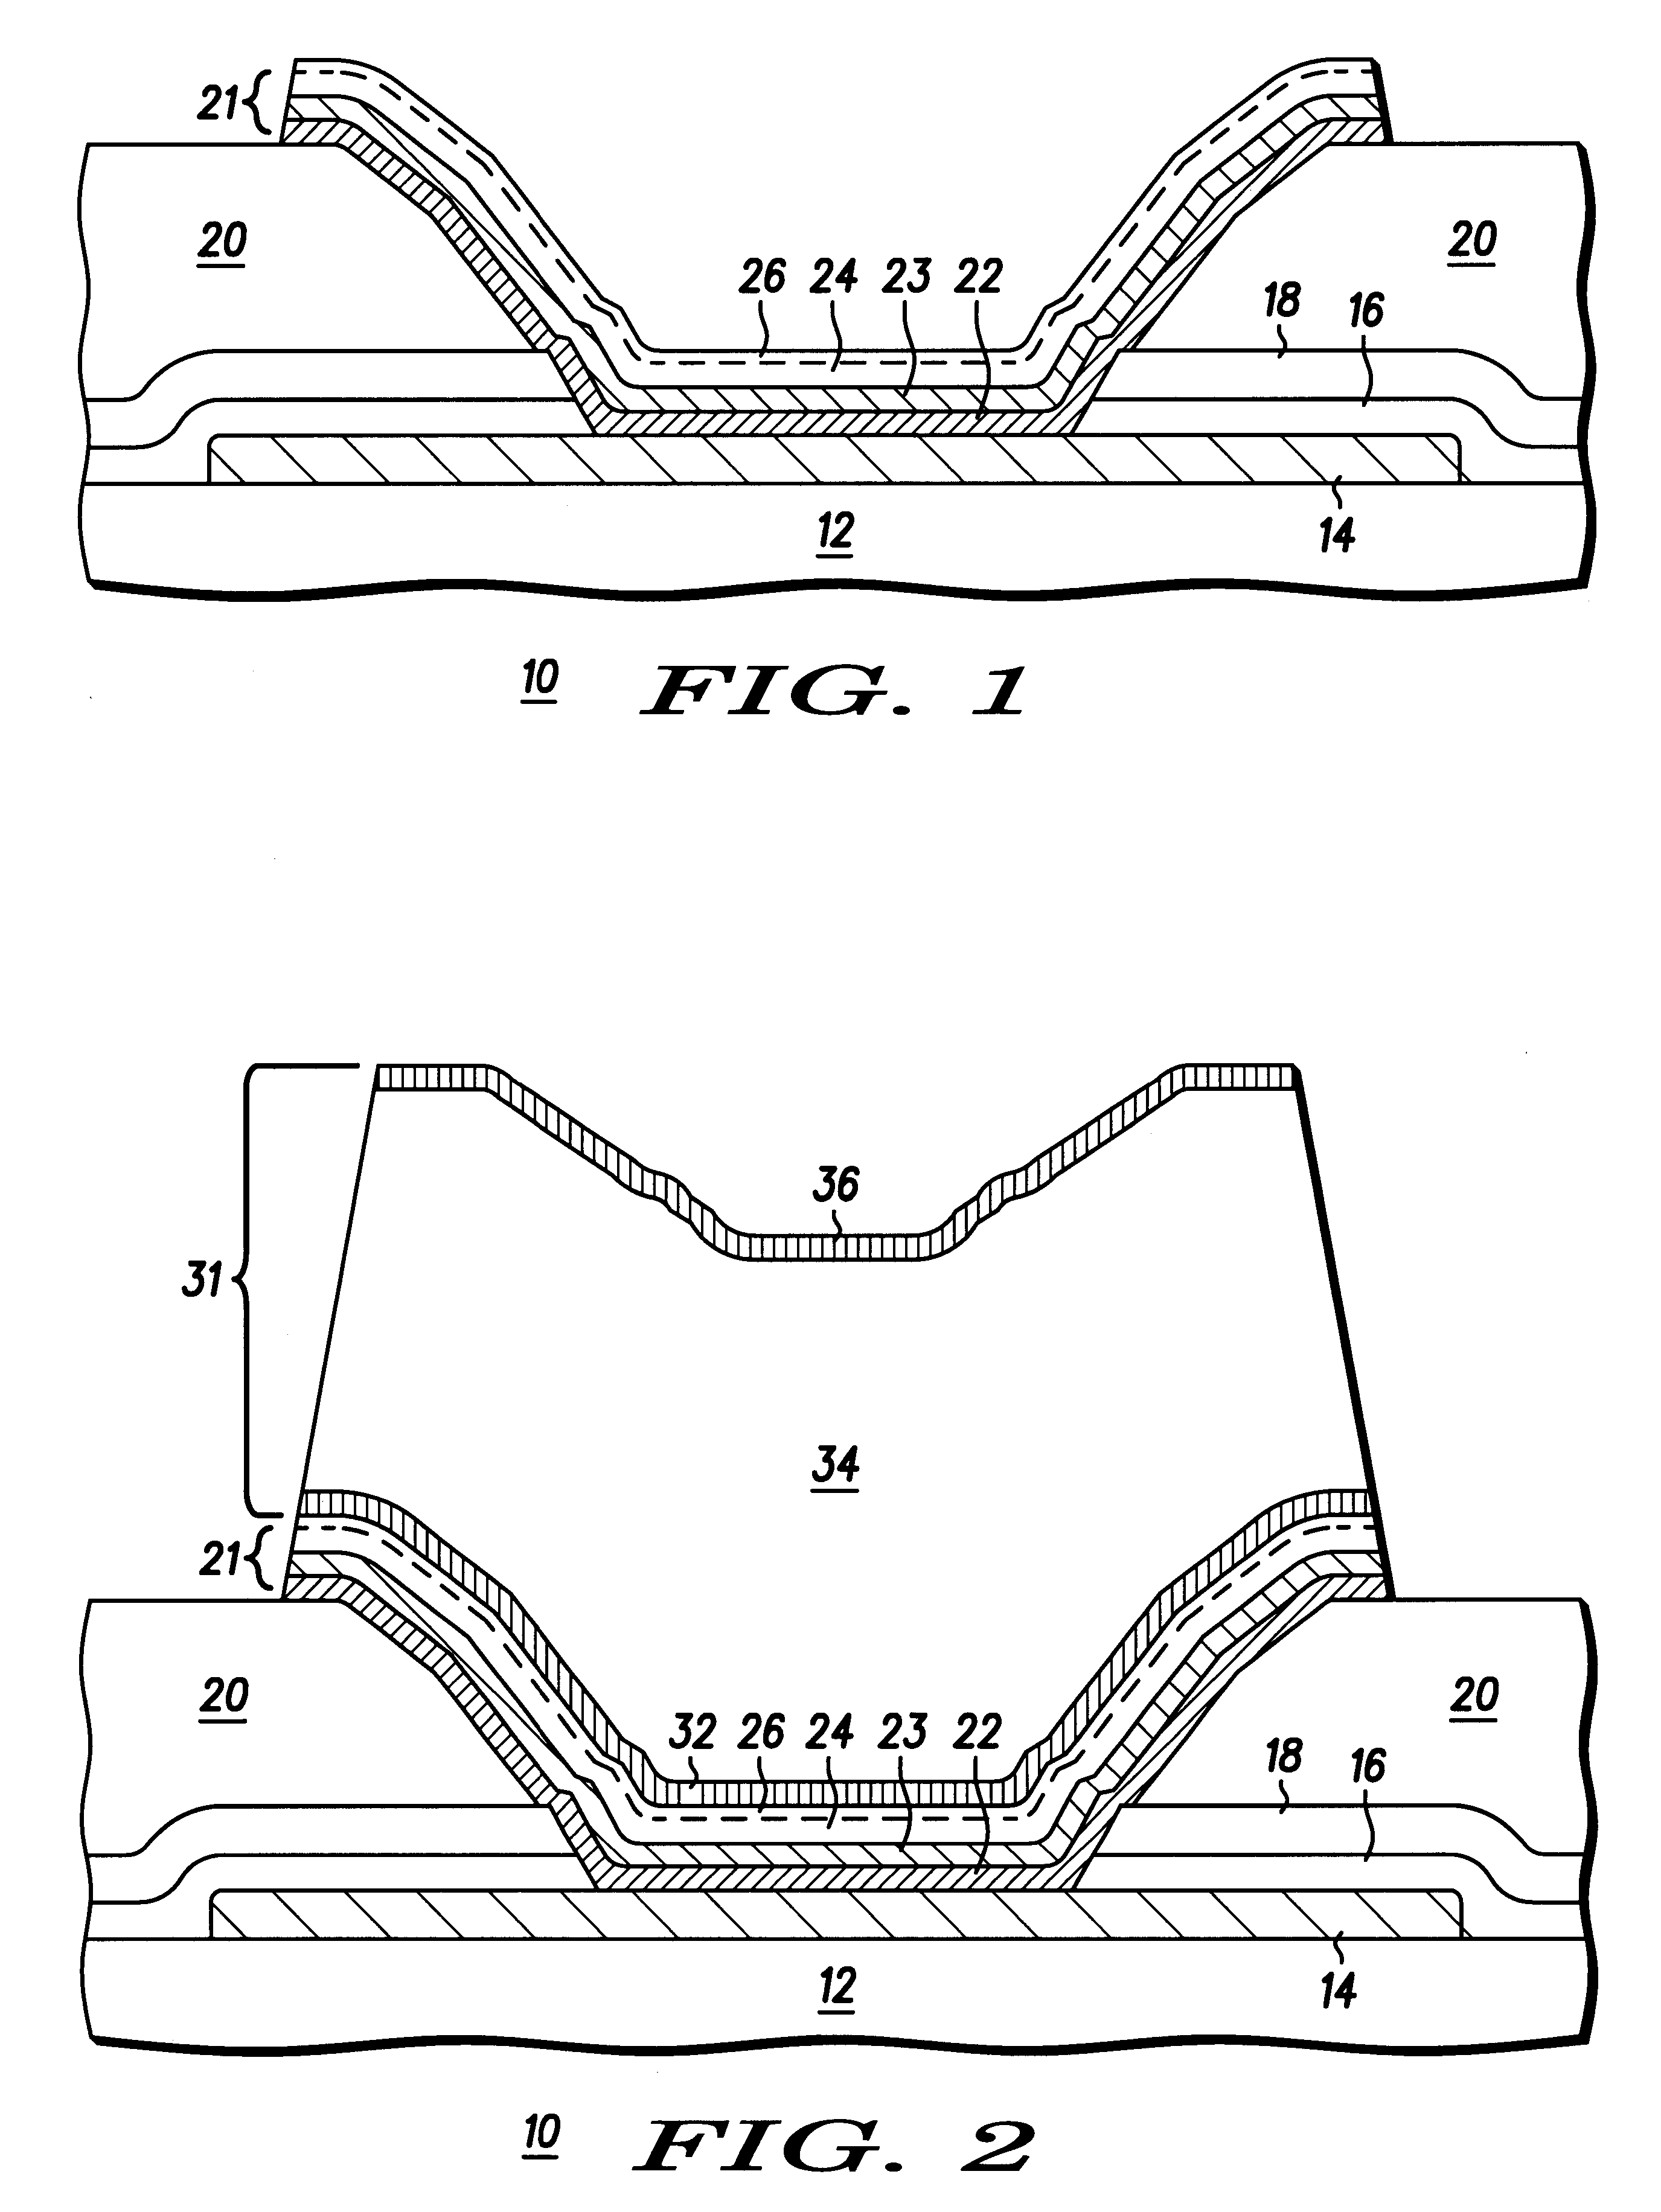 Method of forming a semiconductor device having conductive bumps without using gold